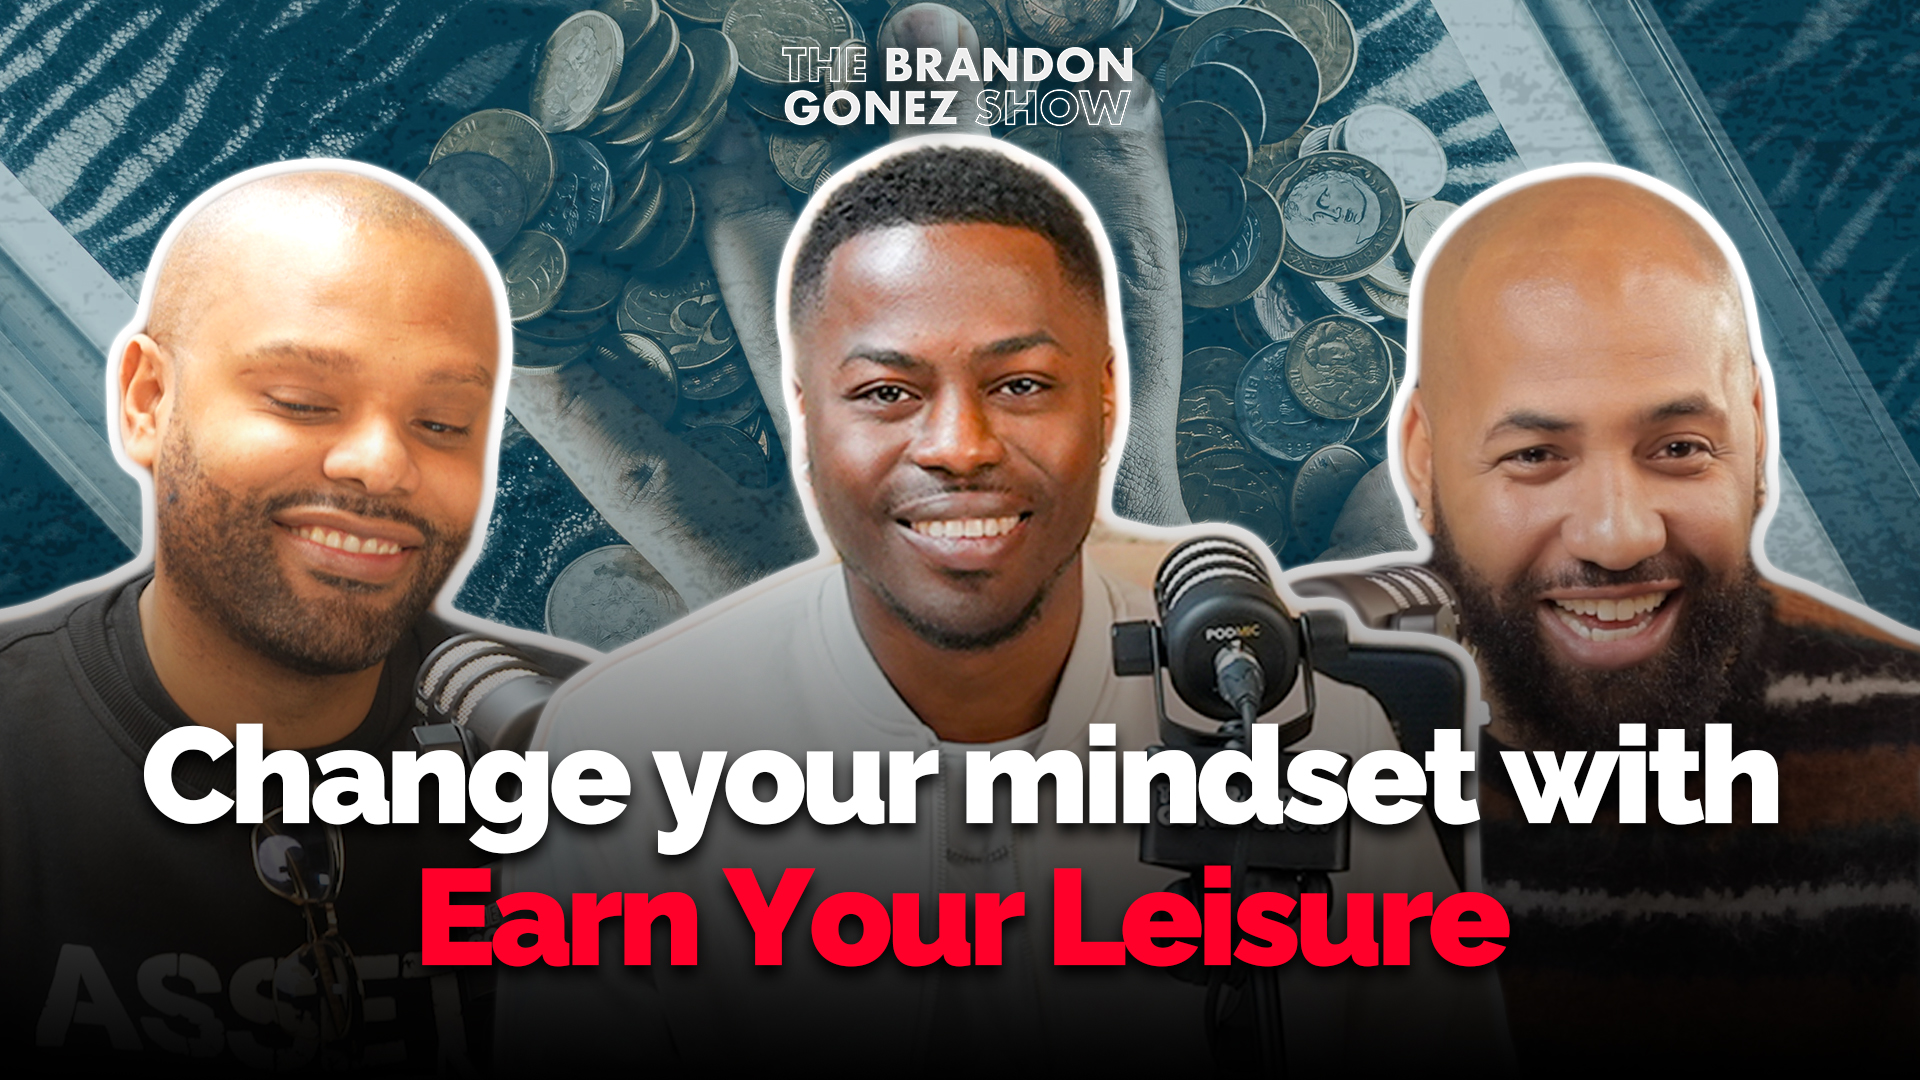 Founders of Earn Your Leisure Share Tips on Building Wealth